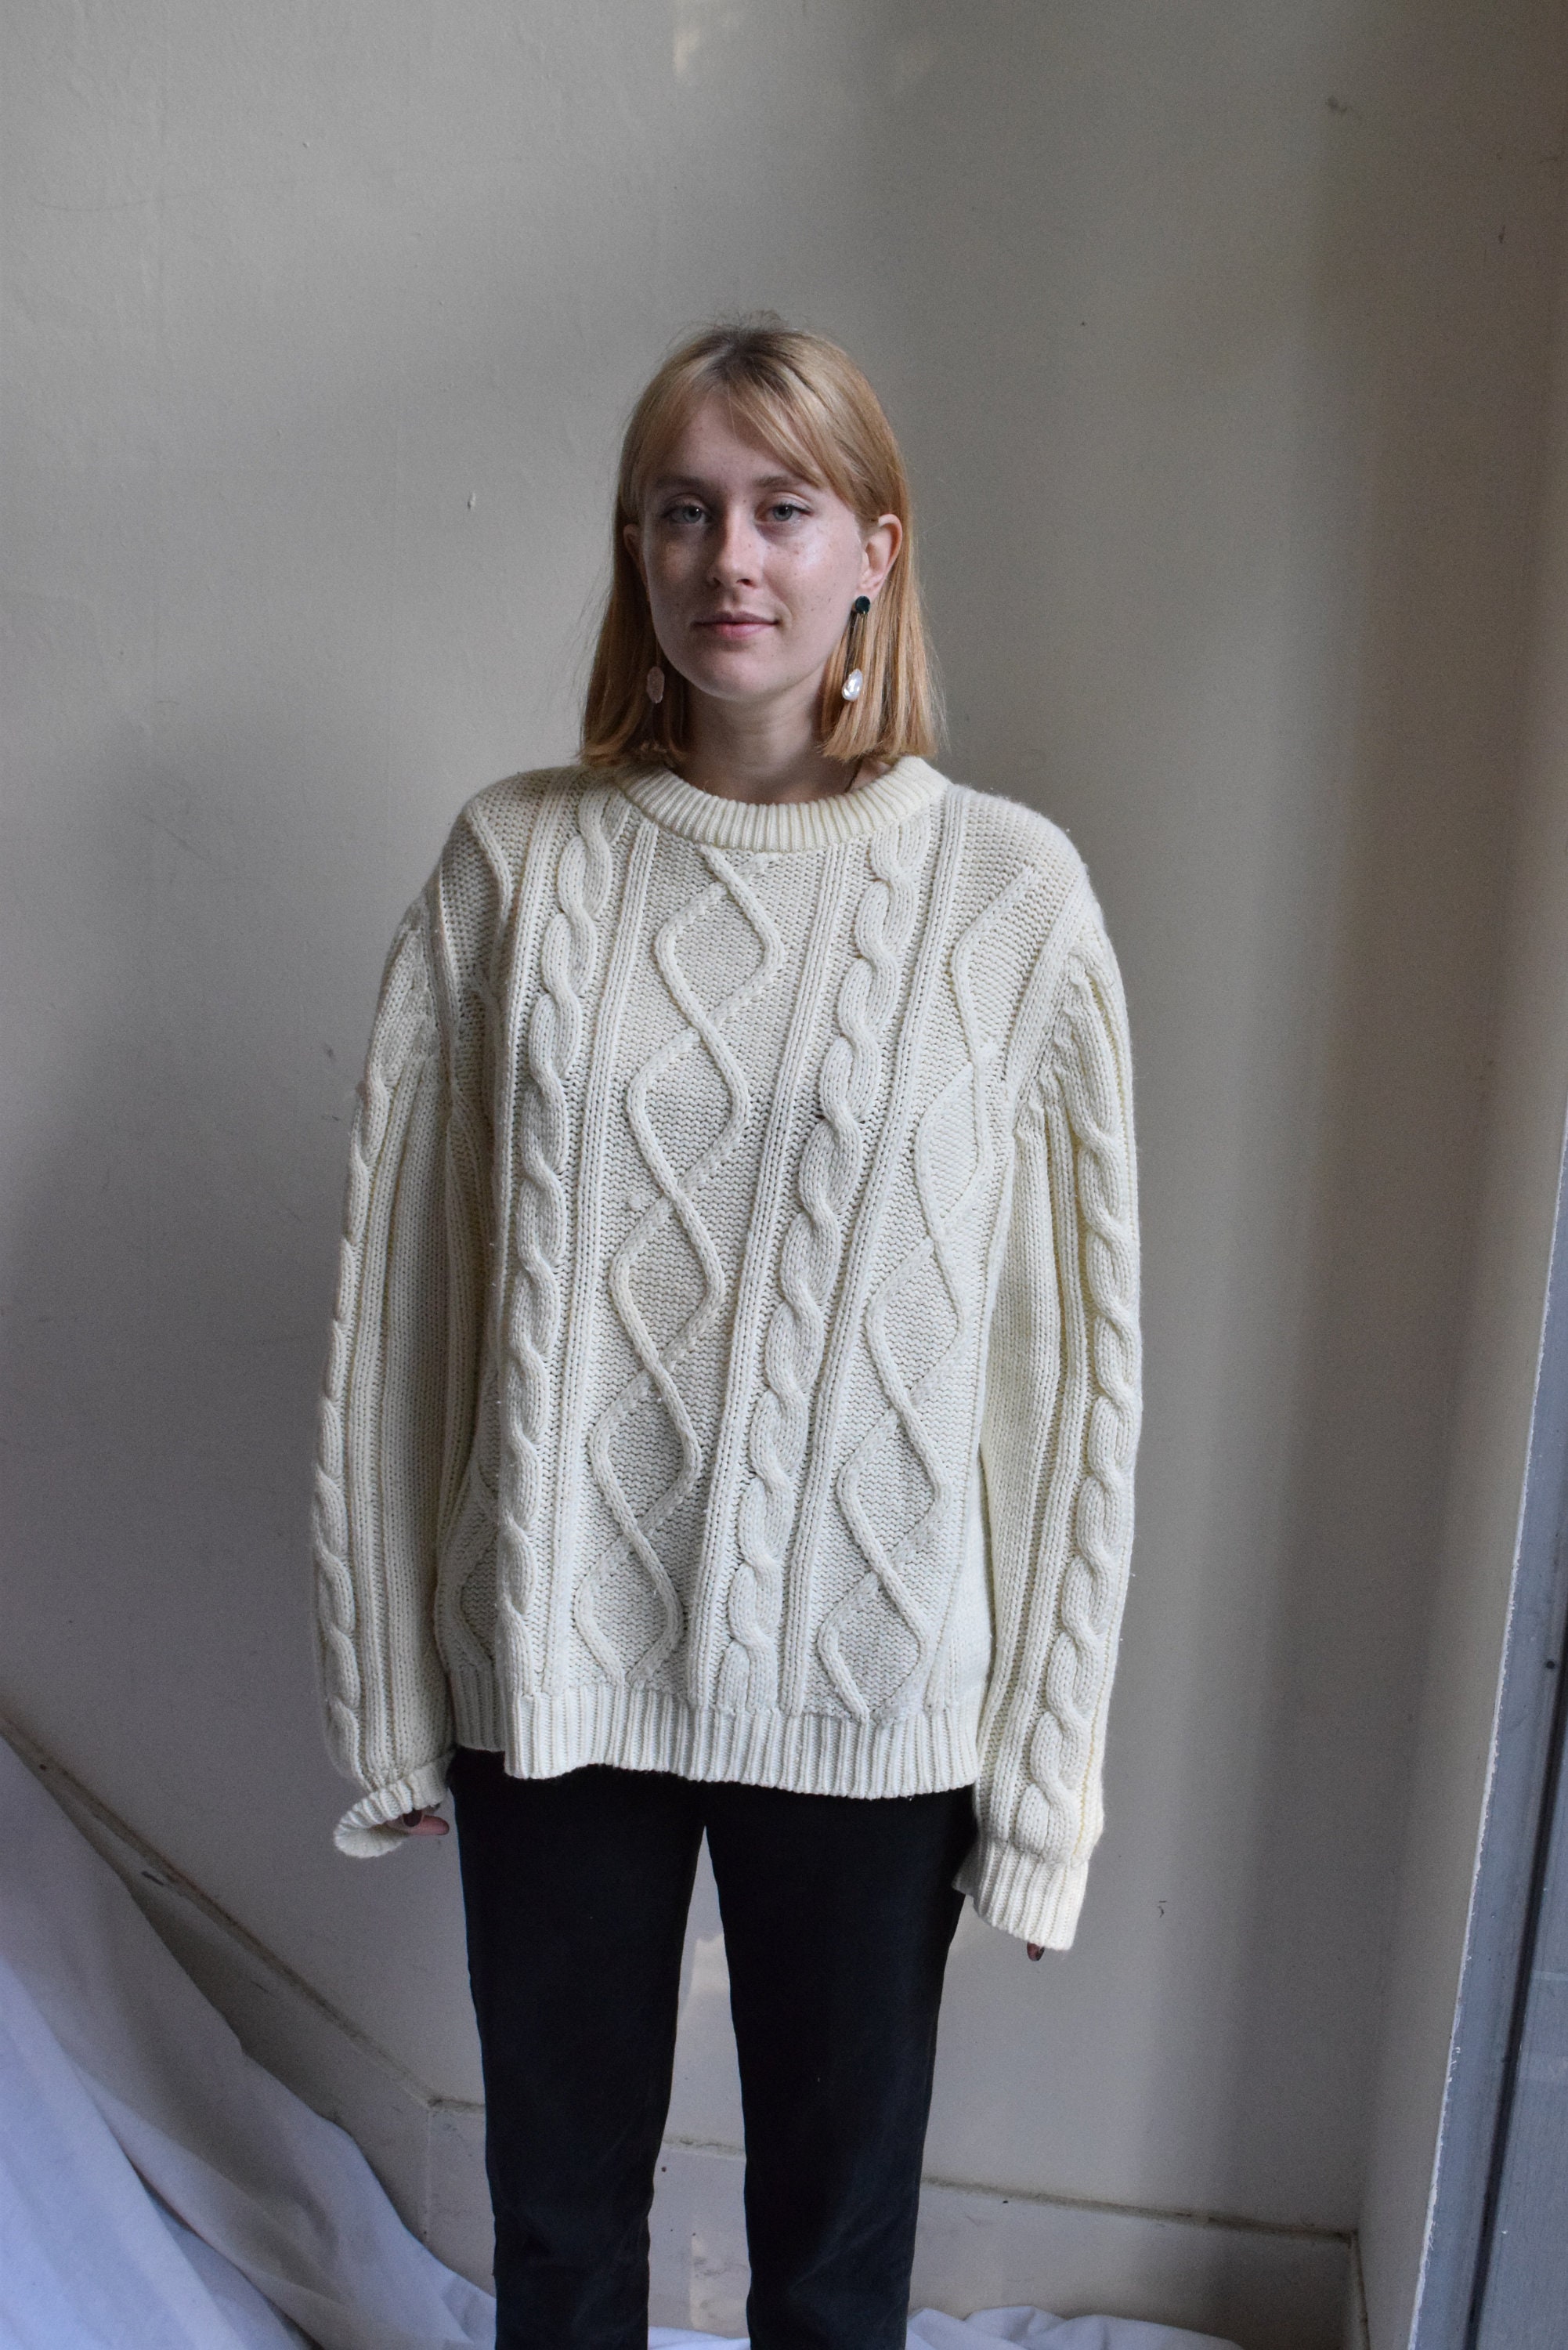 Vintage Hudson Bay Cable Knit Sweater.